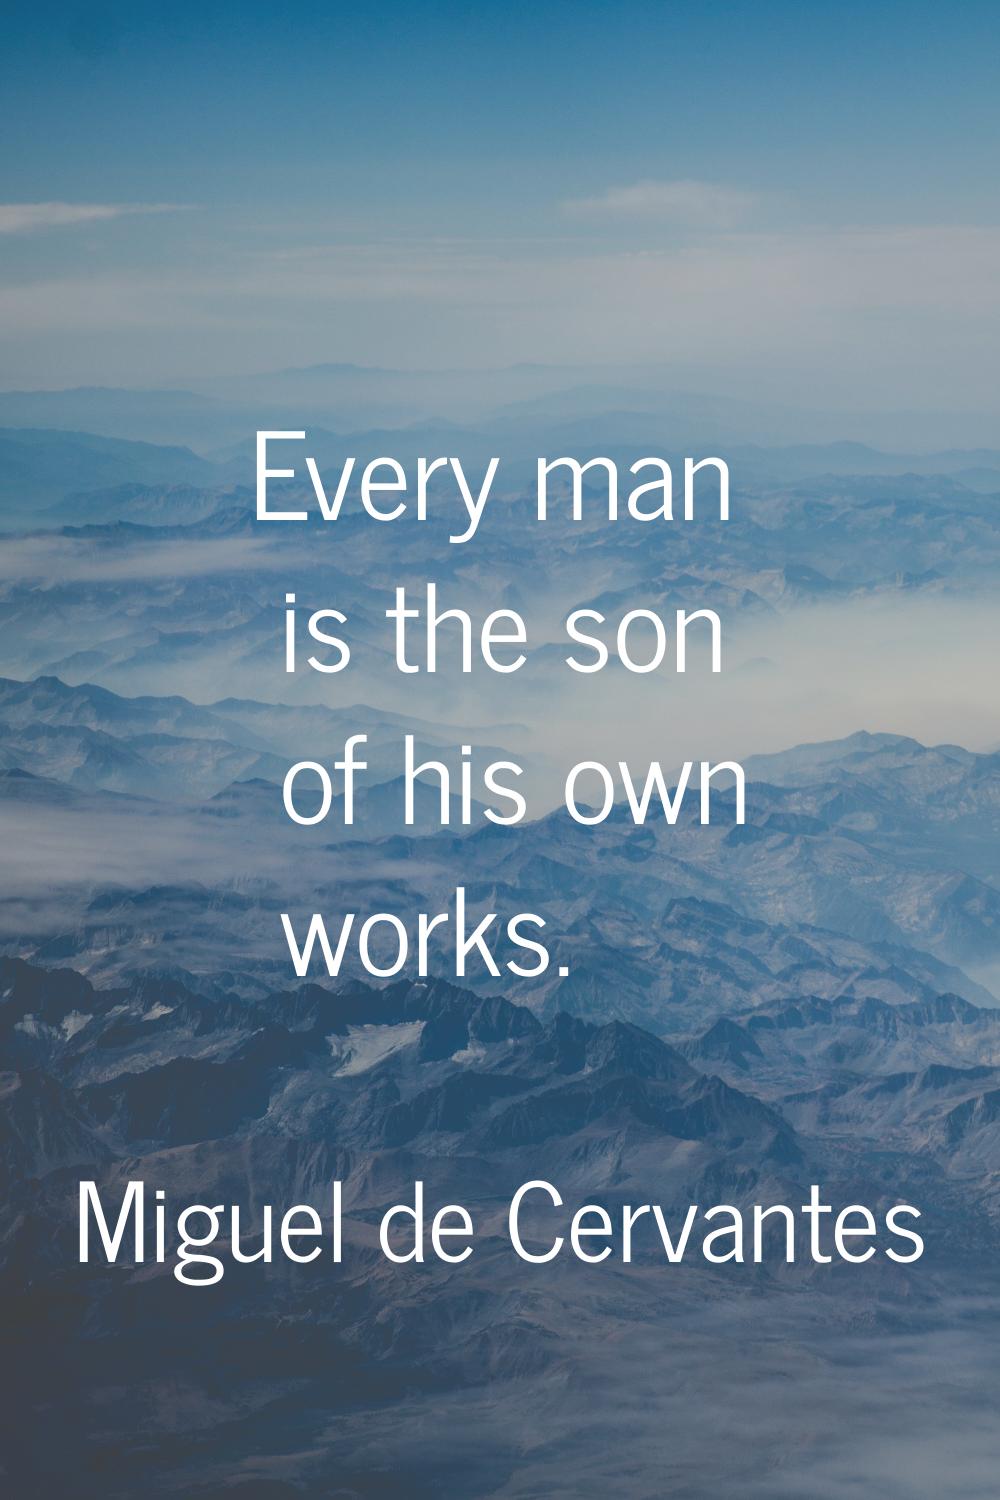 Every man is the son of his own works.